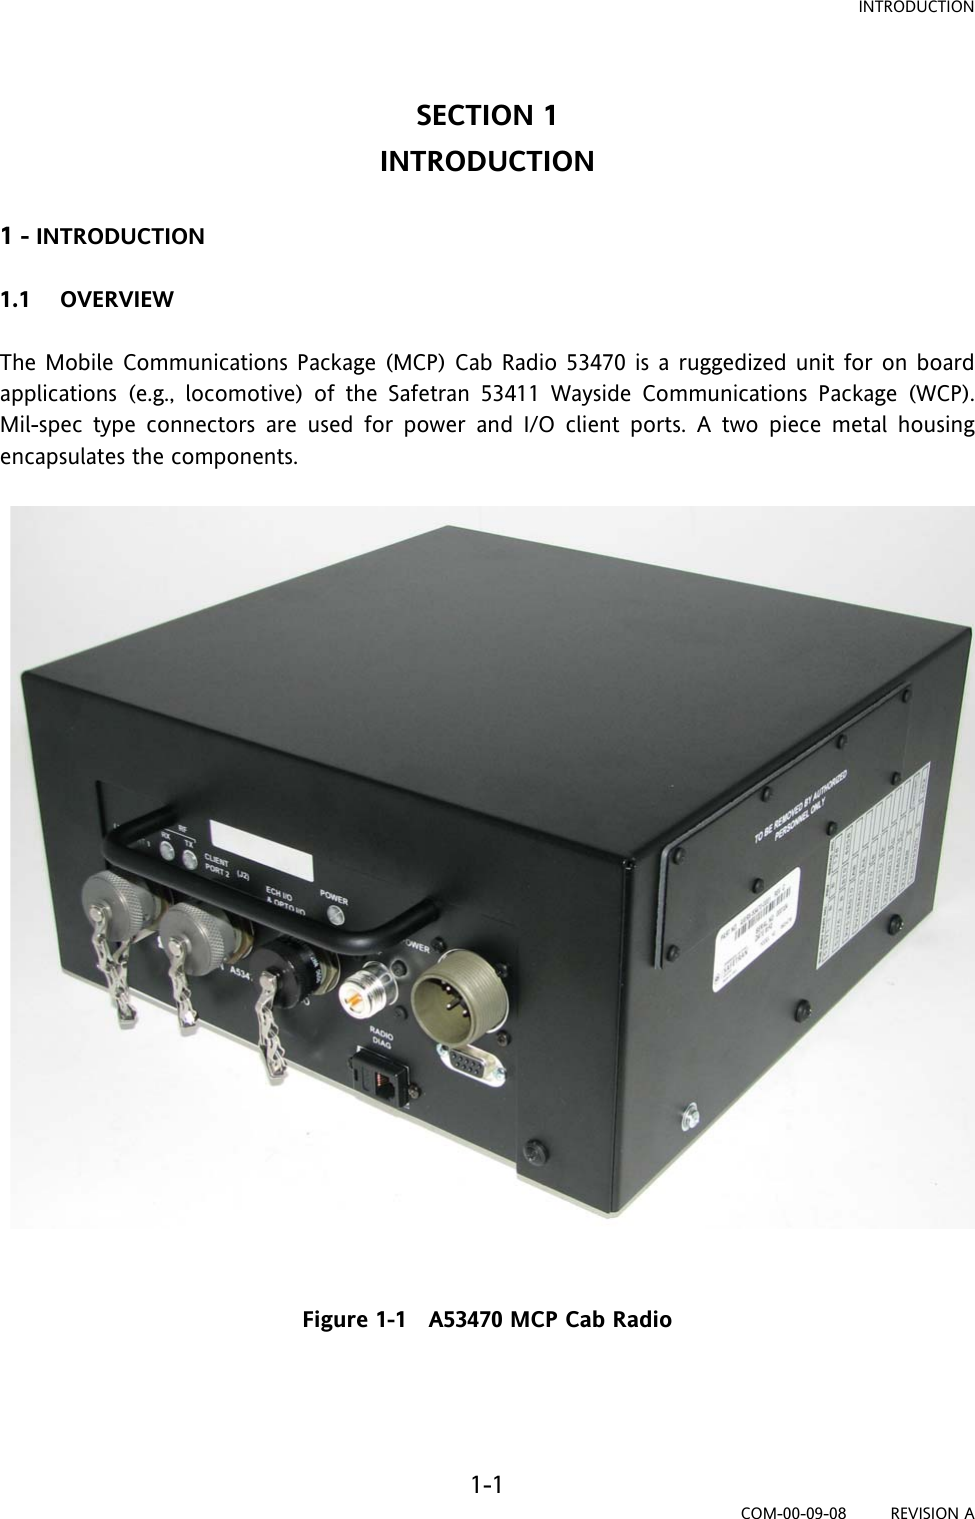 INTRODUCTION 1-1 COM-00-09-08         REVISION A SECTION 1 INTRODUCTION  1 - INTRODUCTION  1.1 OVERVIEW  The Mobile Communications Package (MCP) Cab Radio 53470 is a ruggedized unit for on board applications (e.g., locomotive) of the Safetran 53411 Wayside Communications Package (WCP). Mil-spec type connectors are used for power and I/O client ports. A two piece metal housing encapsulates the components.    Figure 1-1   A53470 MCP Cab Radio   